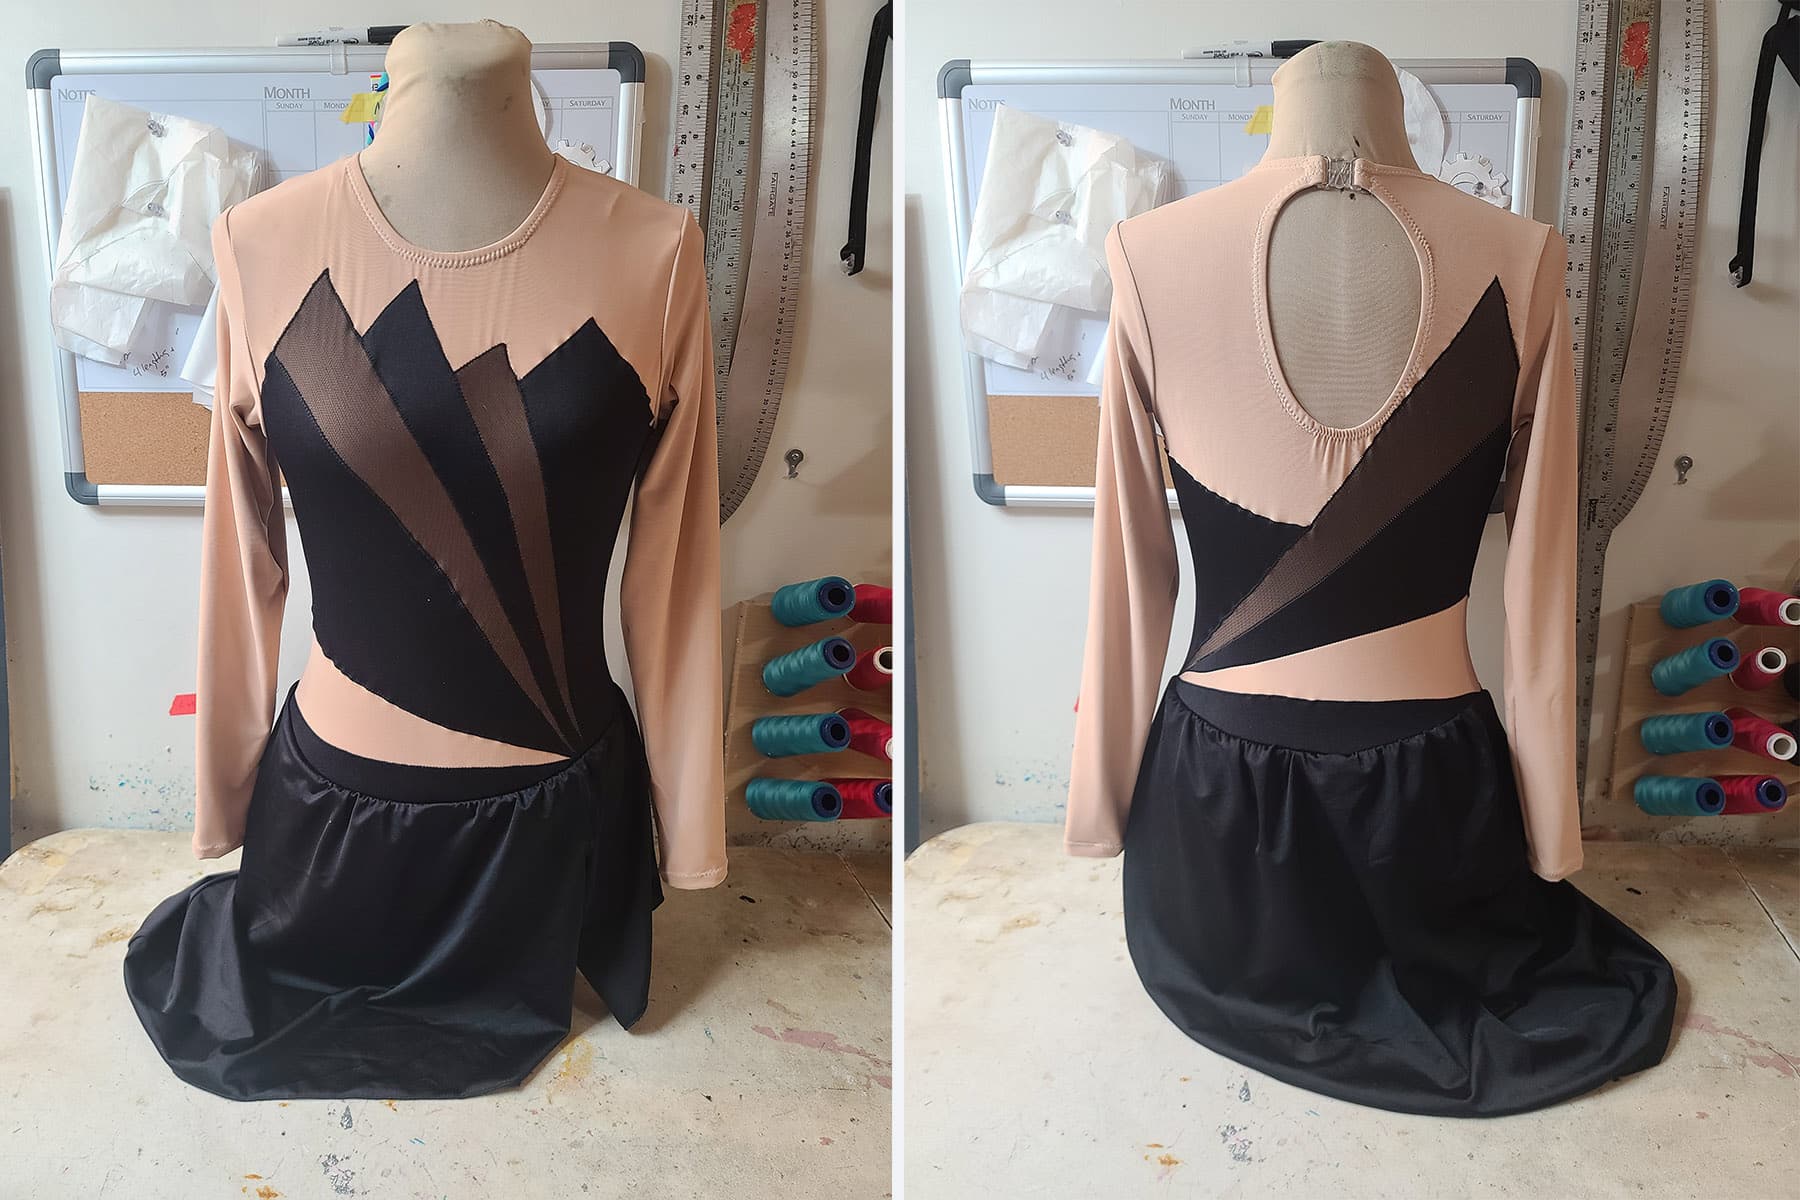 Front and back views of an art deco inspired skating dress. It’s black with black mesh inserts.